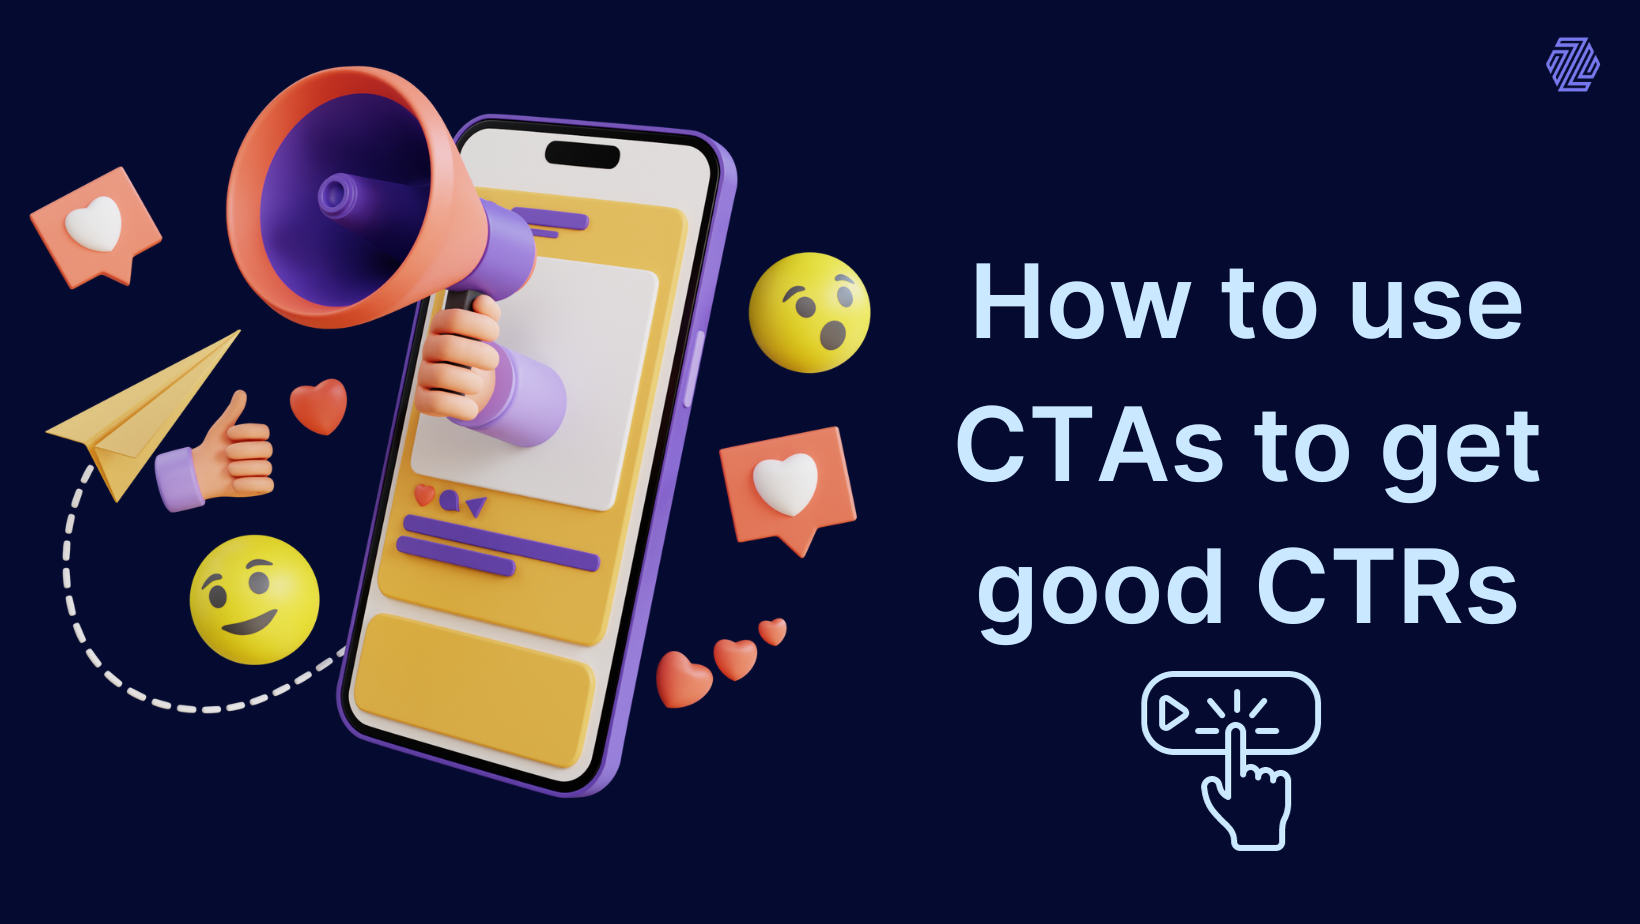 How to use CTAs to get good CTRs